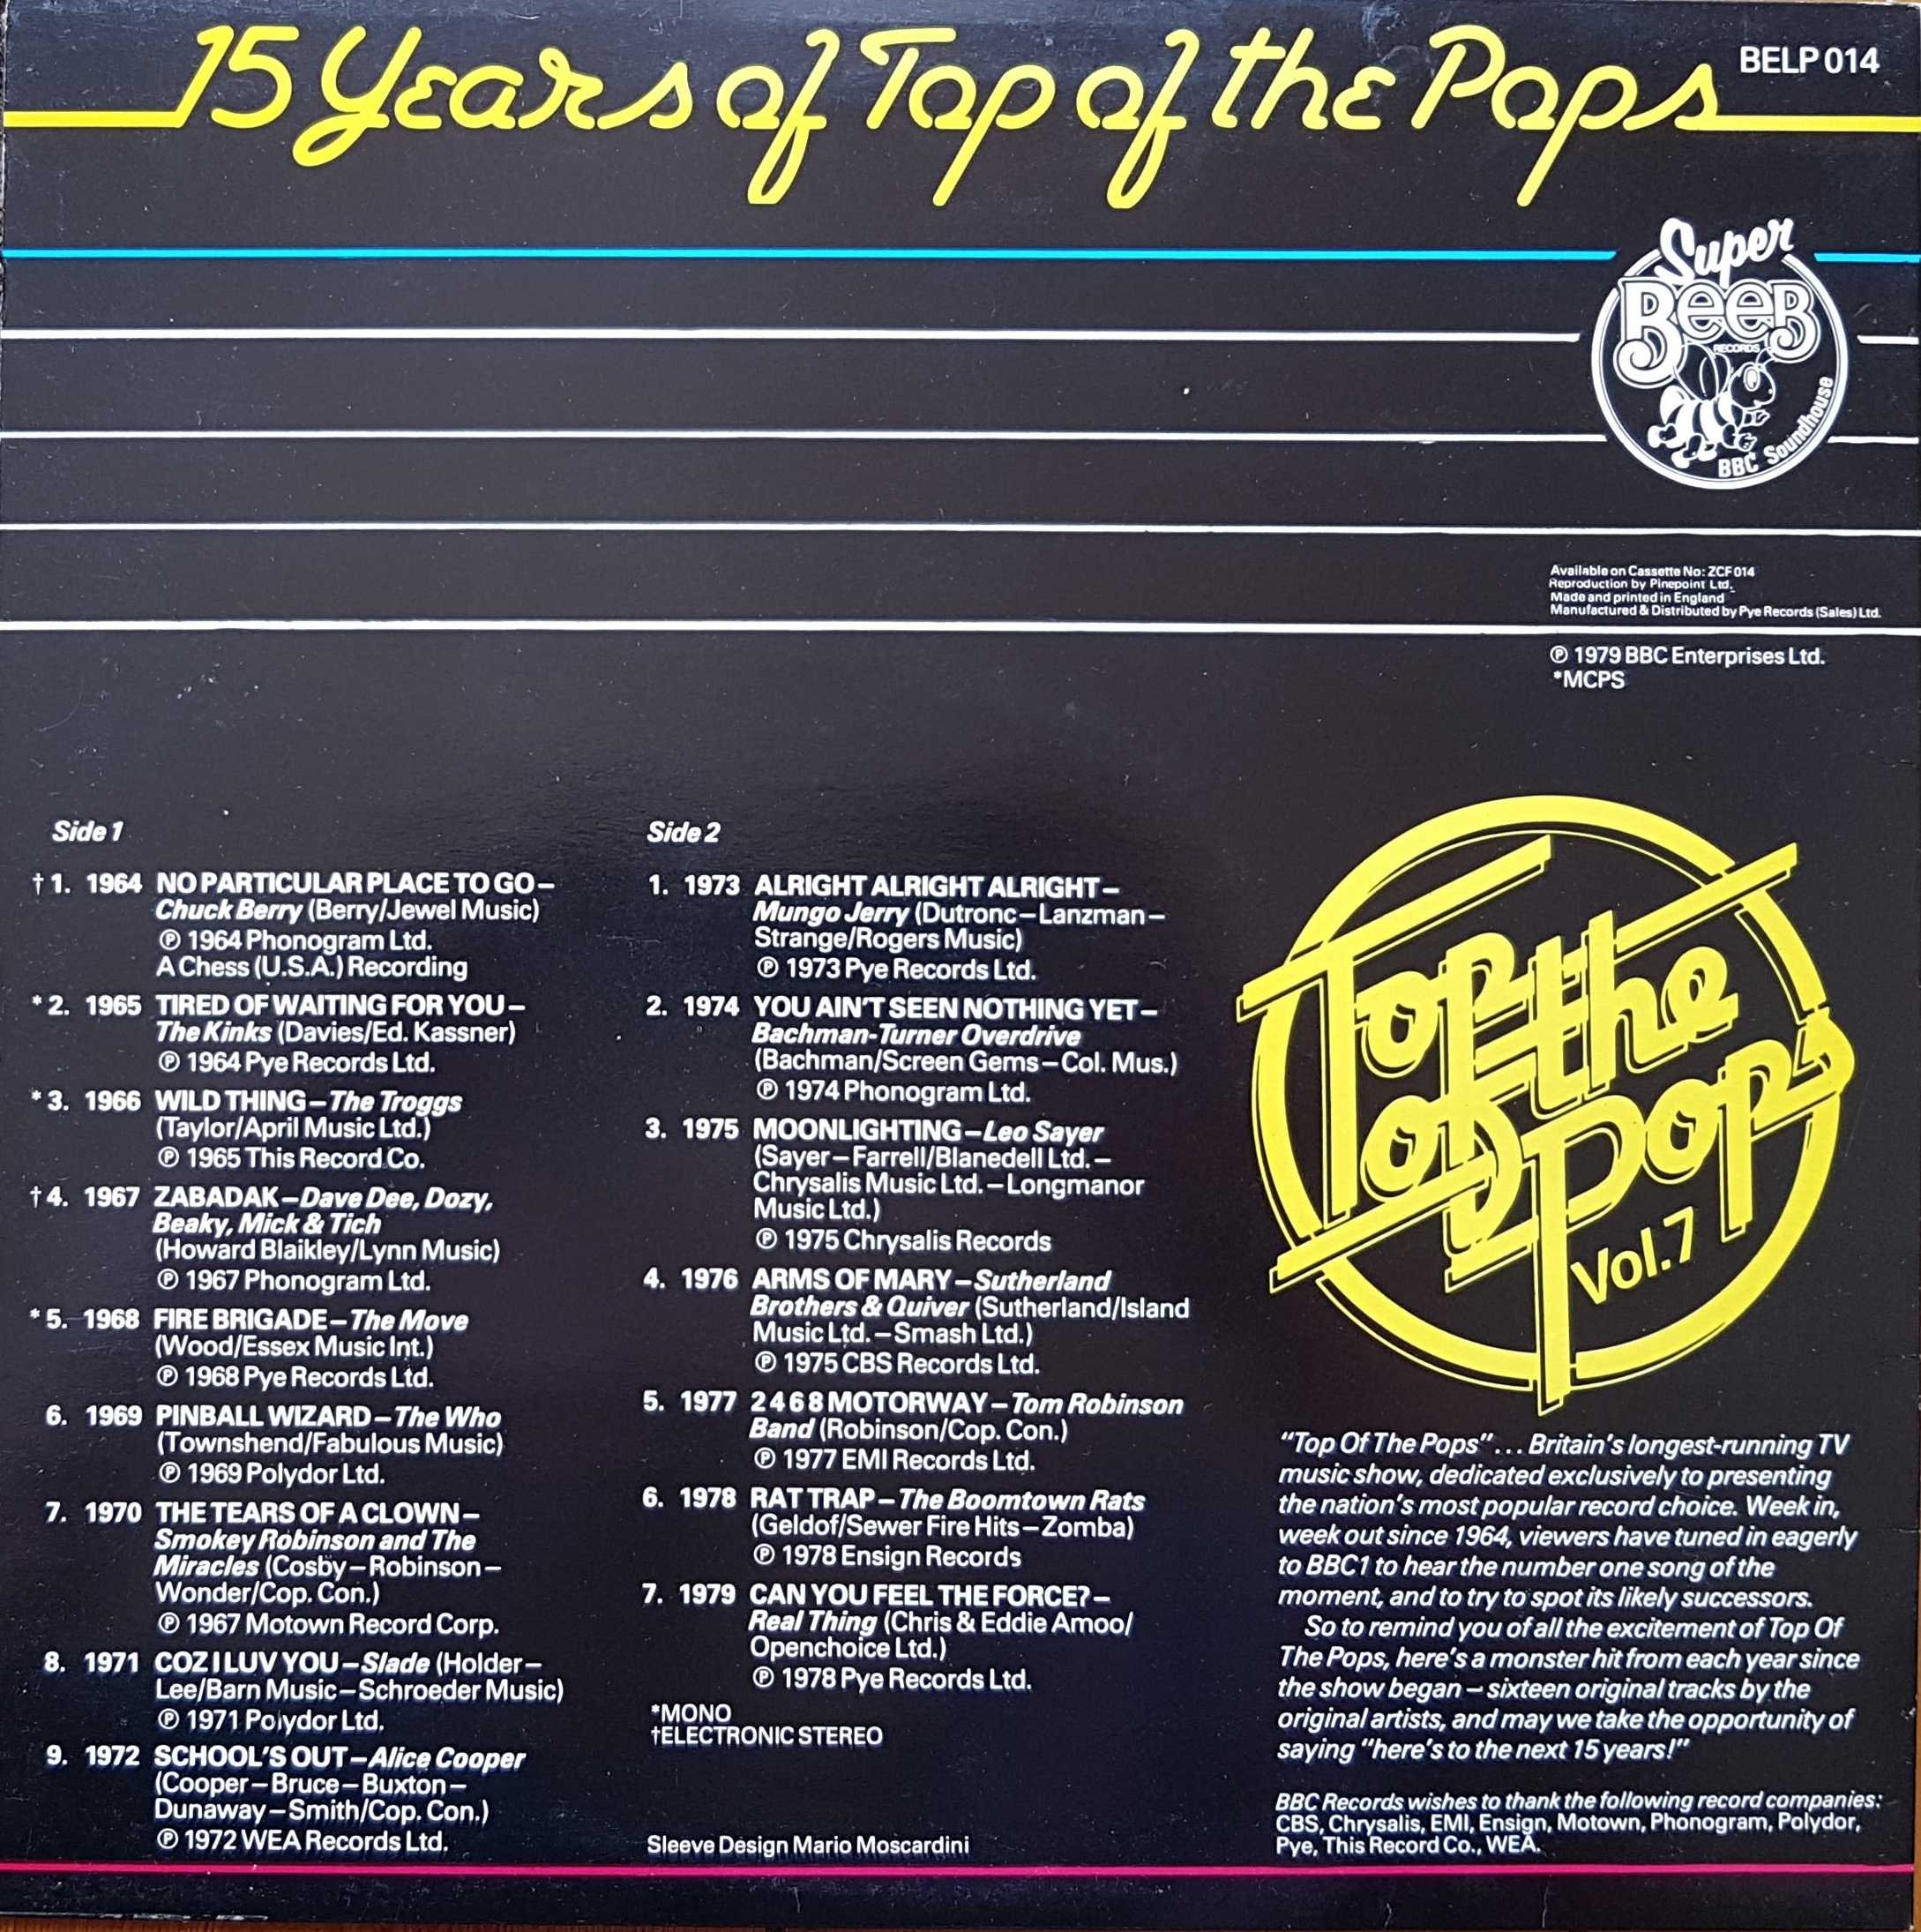 Picture of BELP 014 15 years of top of the pops (Top of the pops volume 7) by artist Various from the BBC records and Tapes library